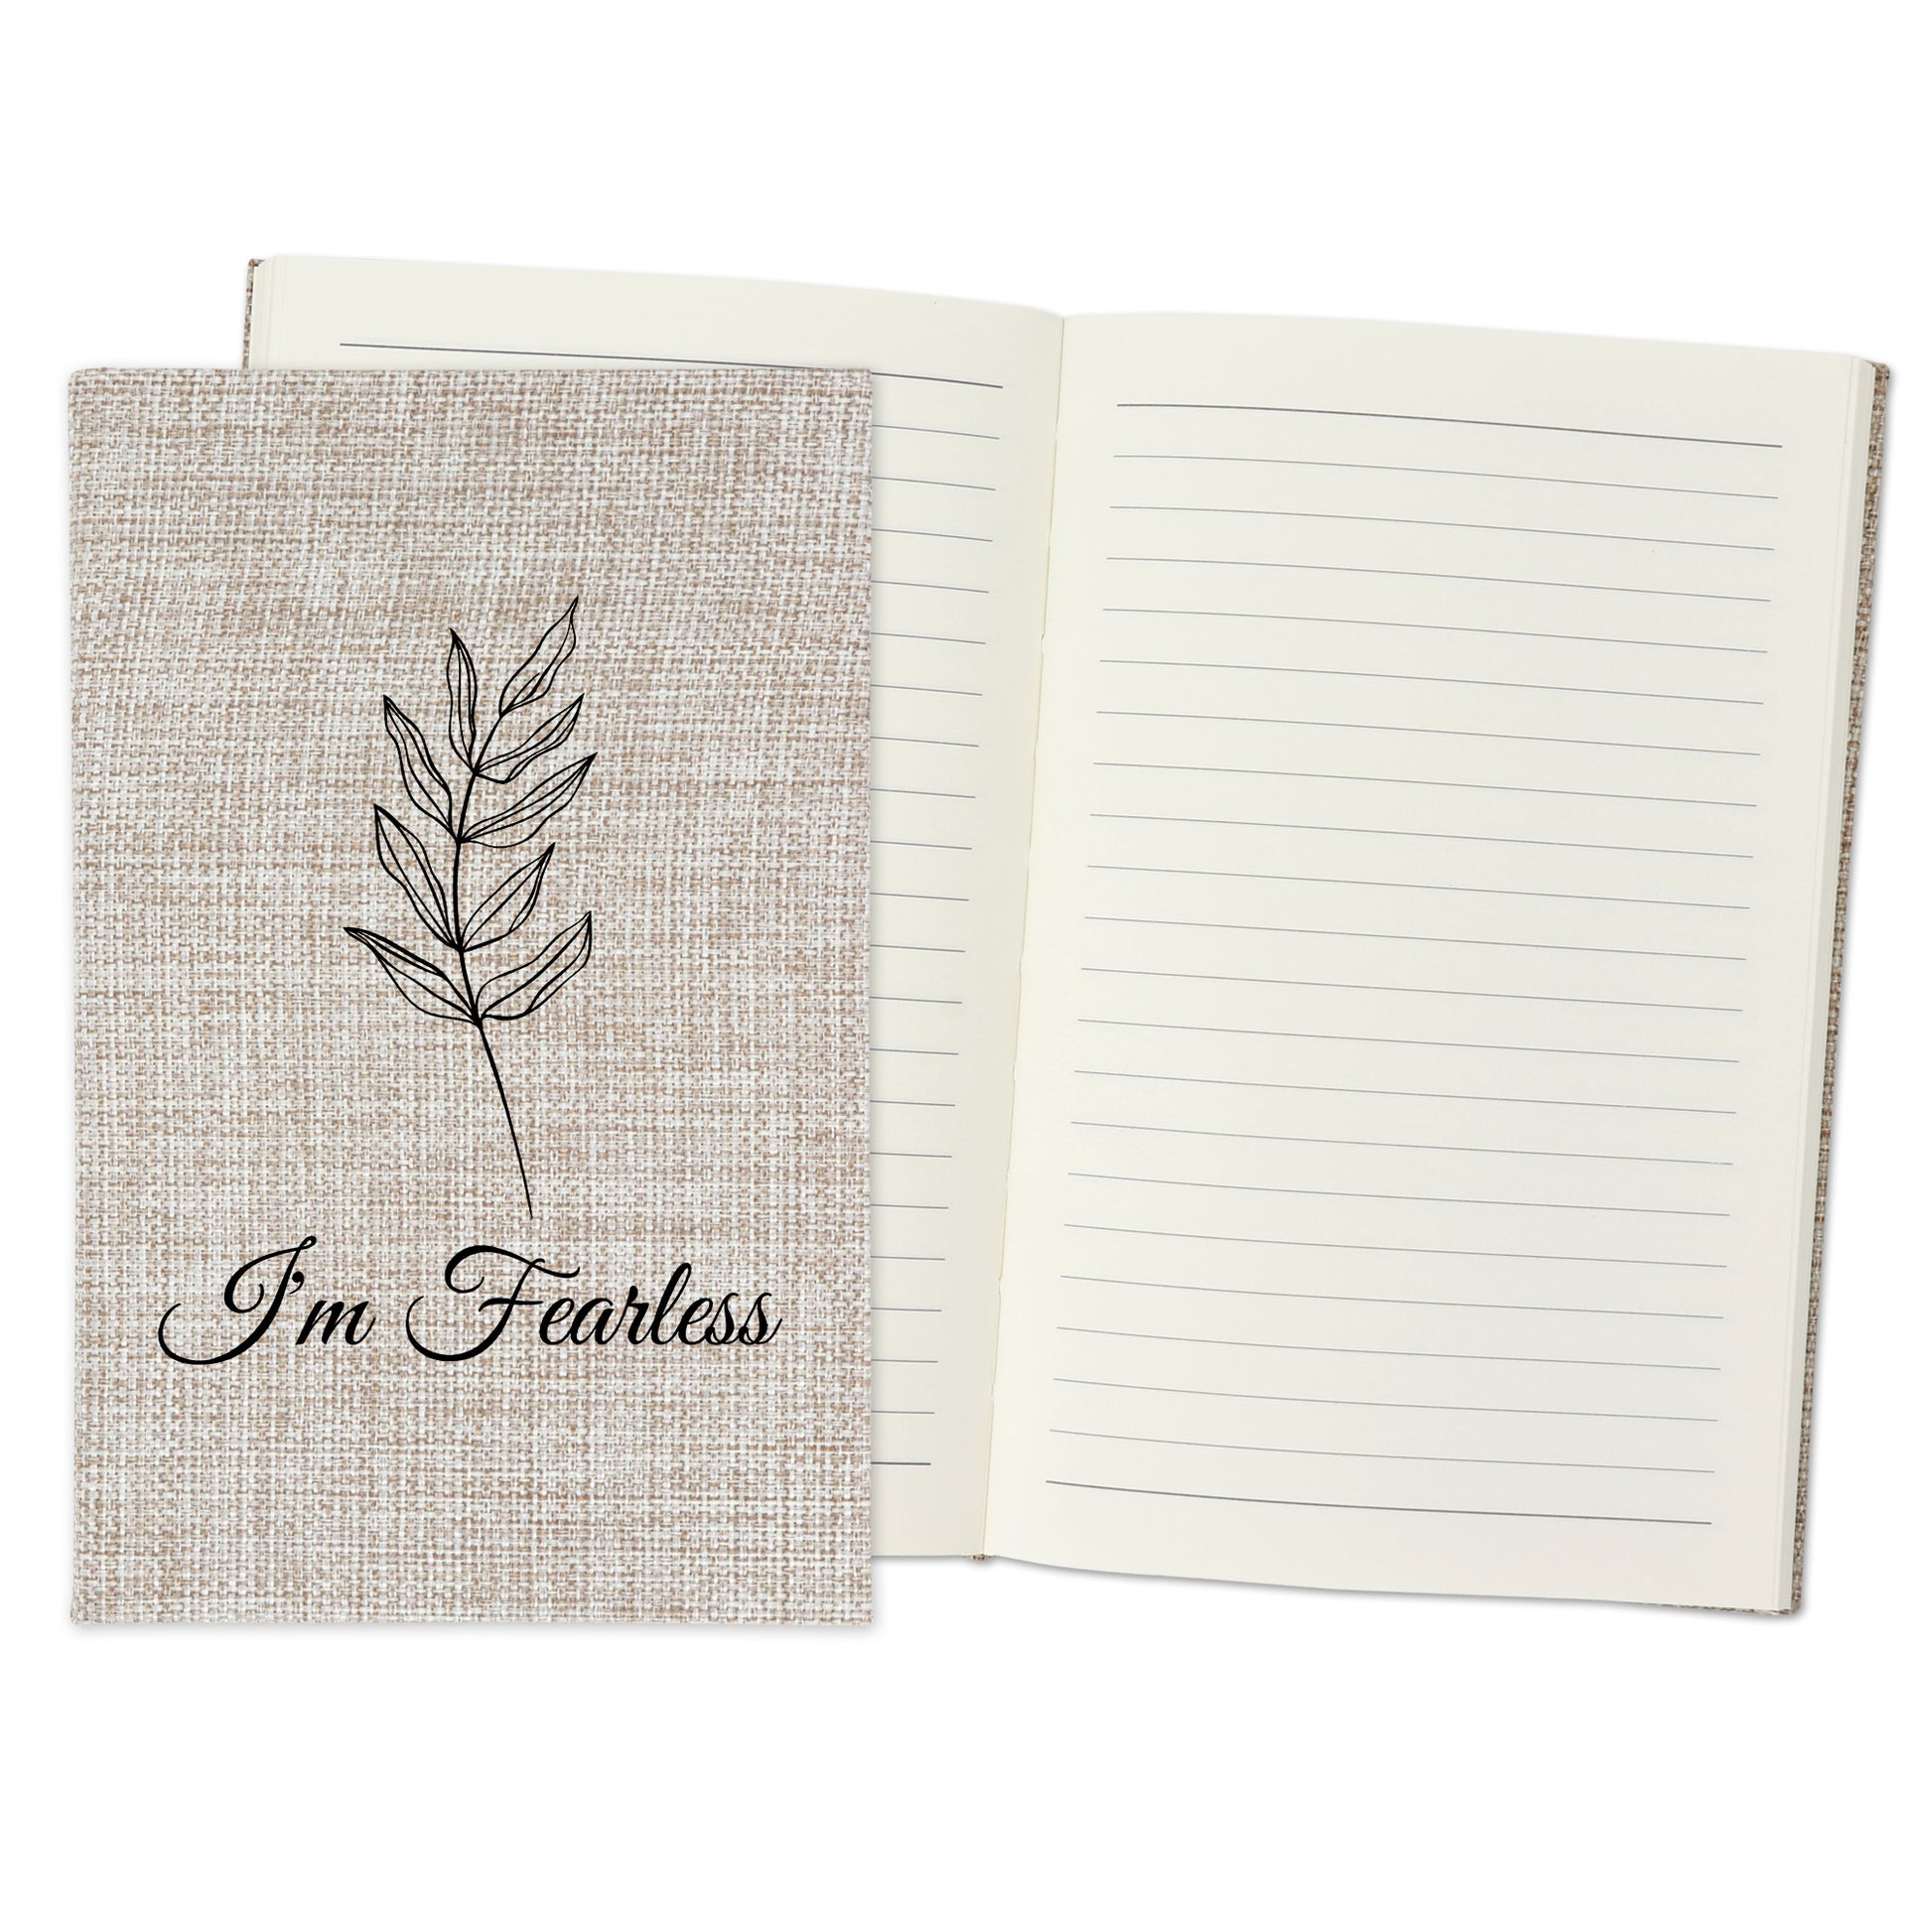 I'm Fearless - Affirmation Quote Burlap Notebook Journal with Lined Pages